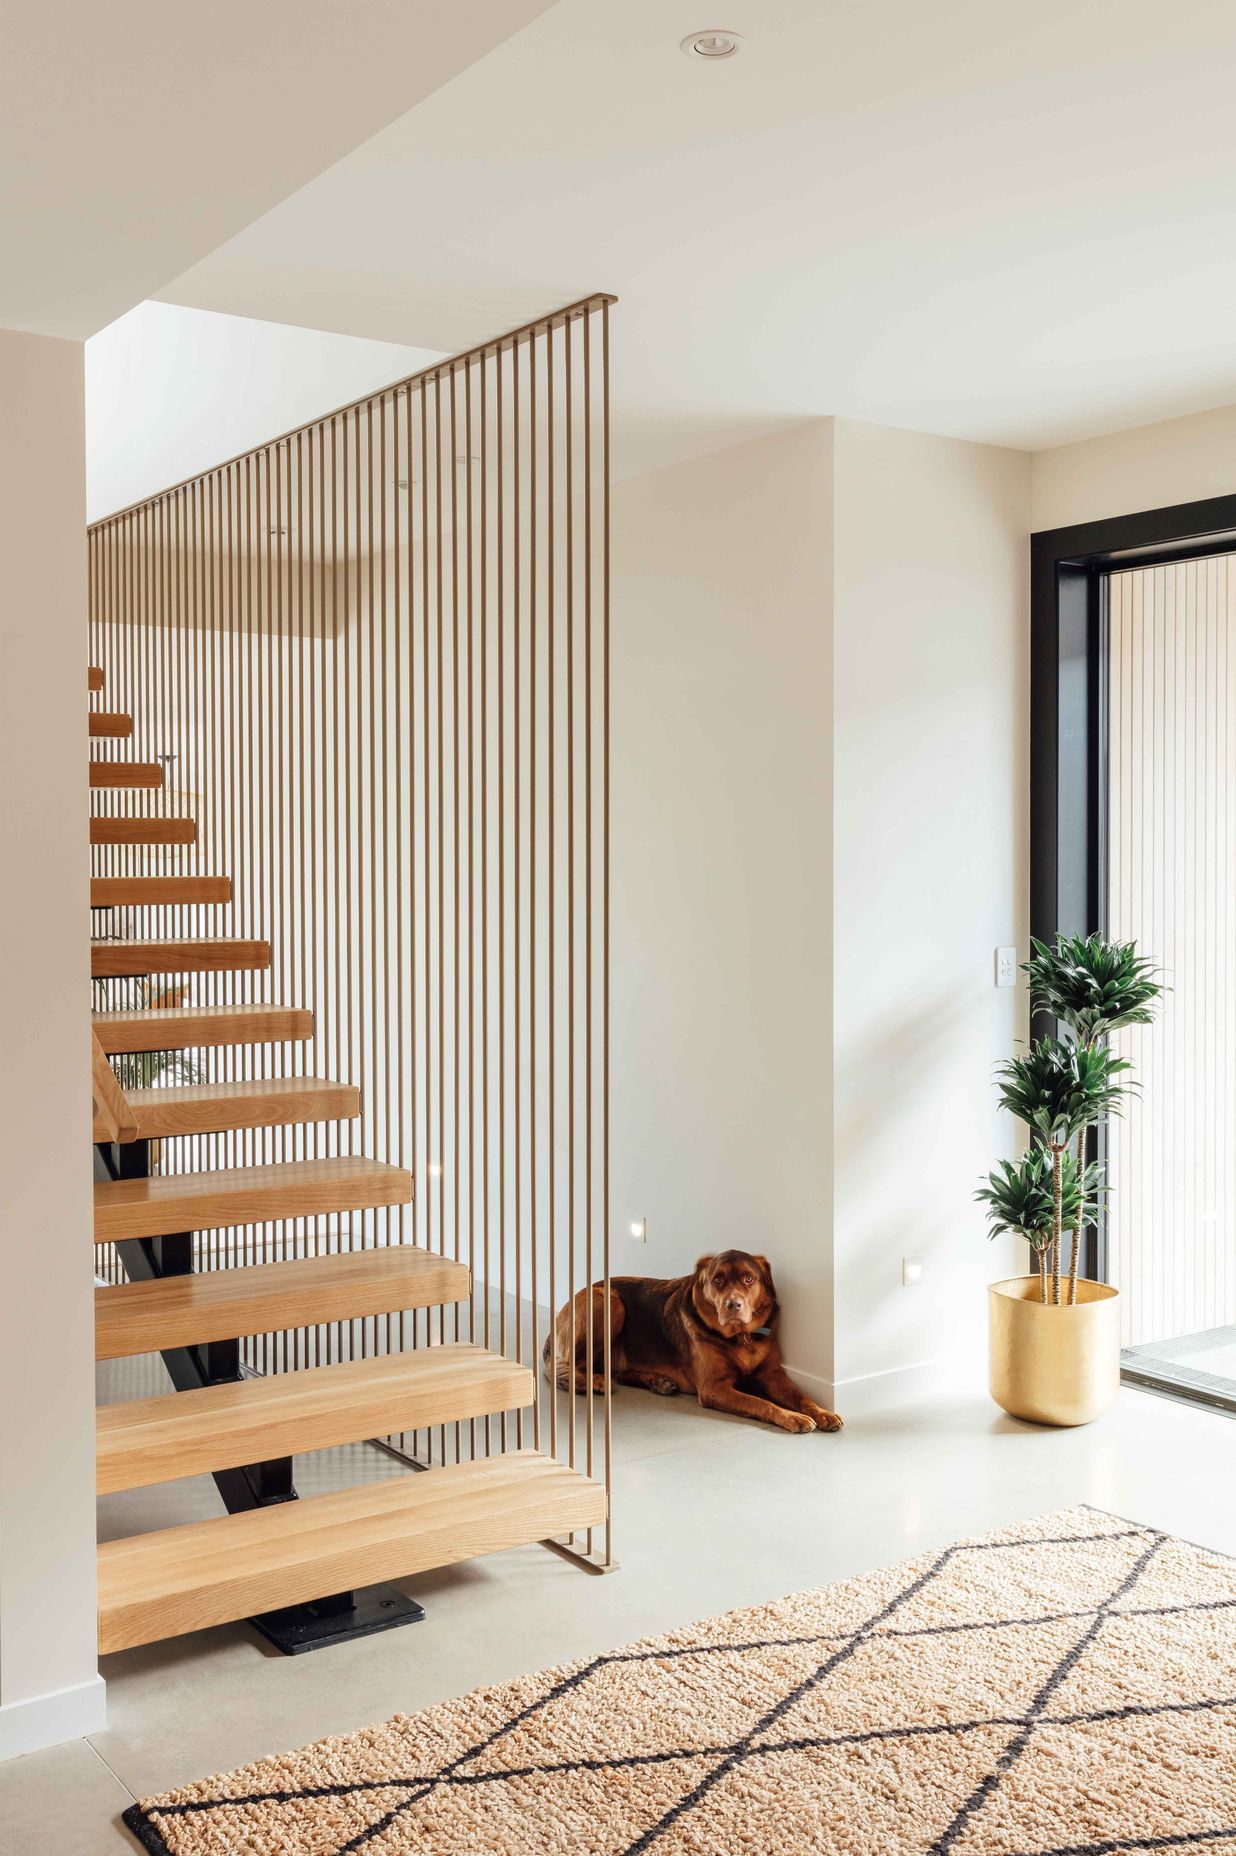 An open-tread, suspended timber staircase creates a floating element in the entry space.